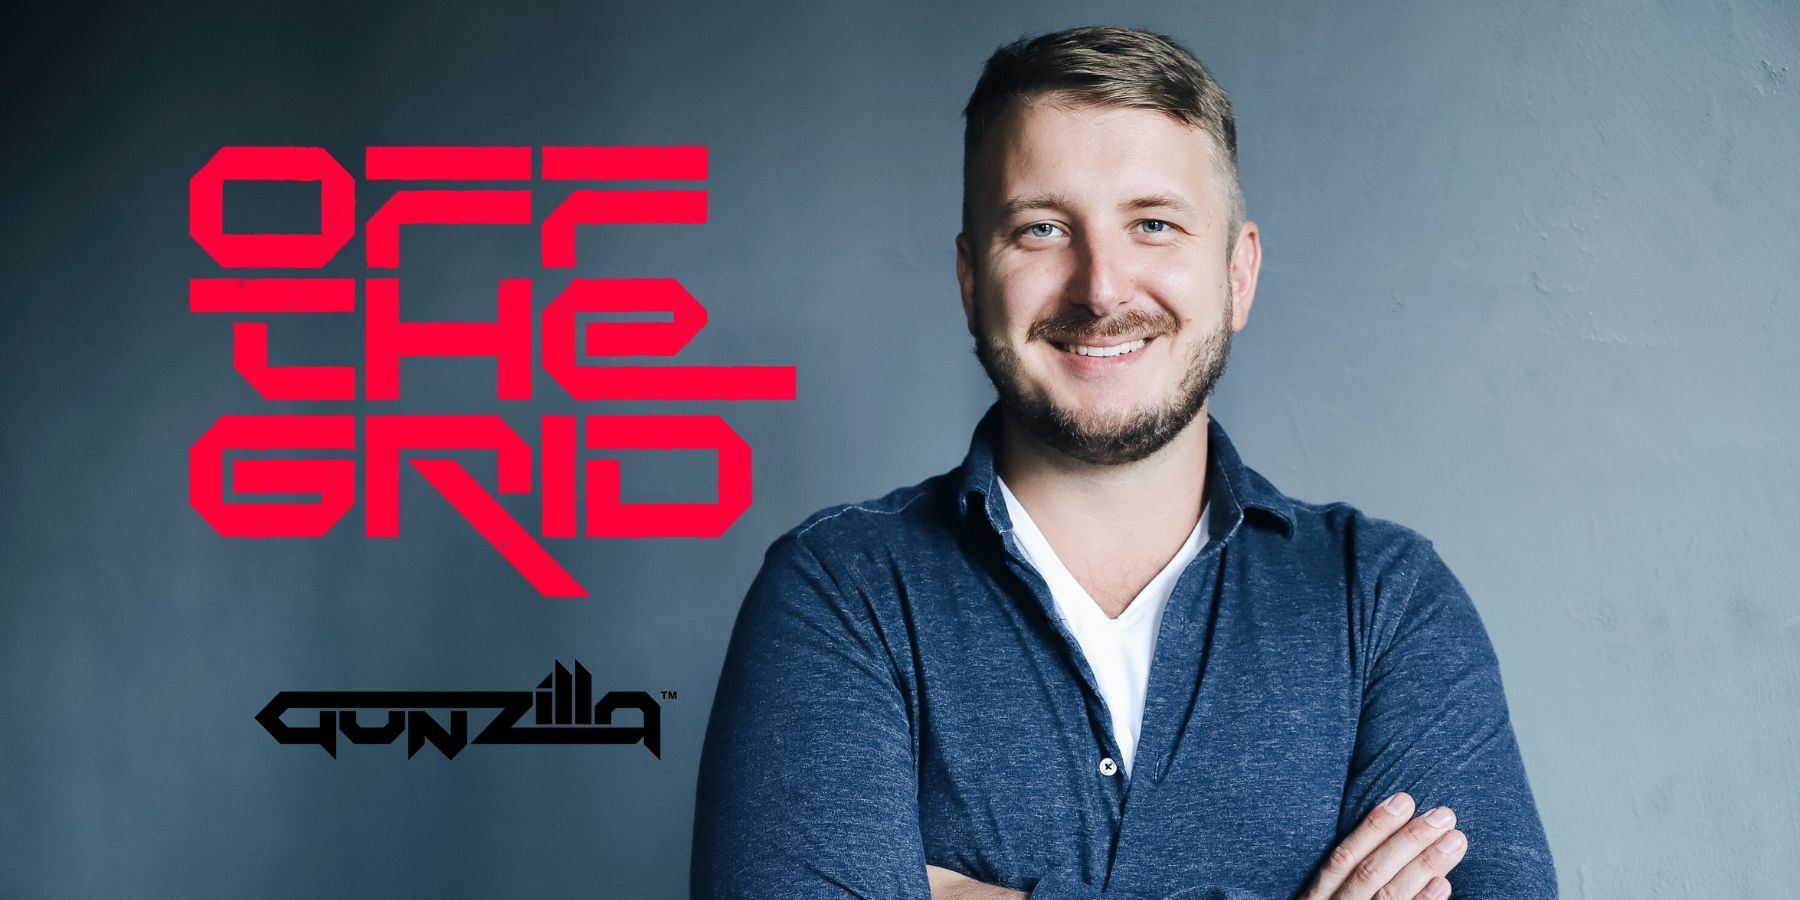 off the grid Vlad Korolev Gunzilla Games CEO and Co-Founder